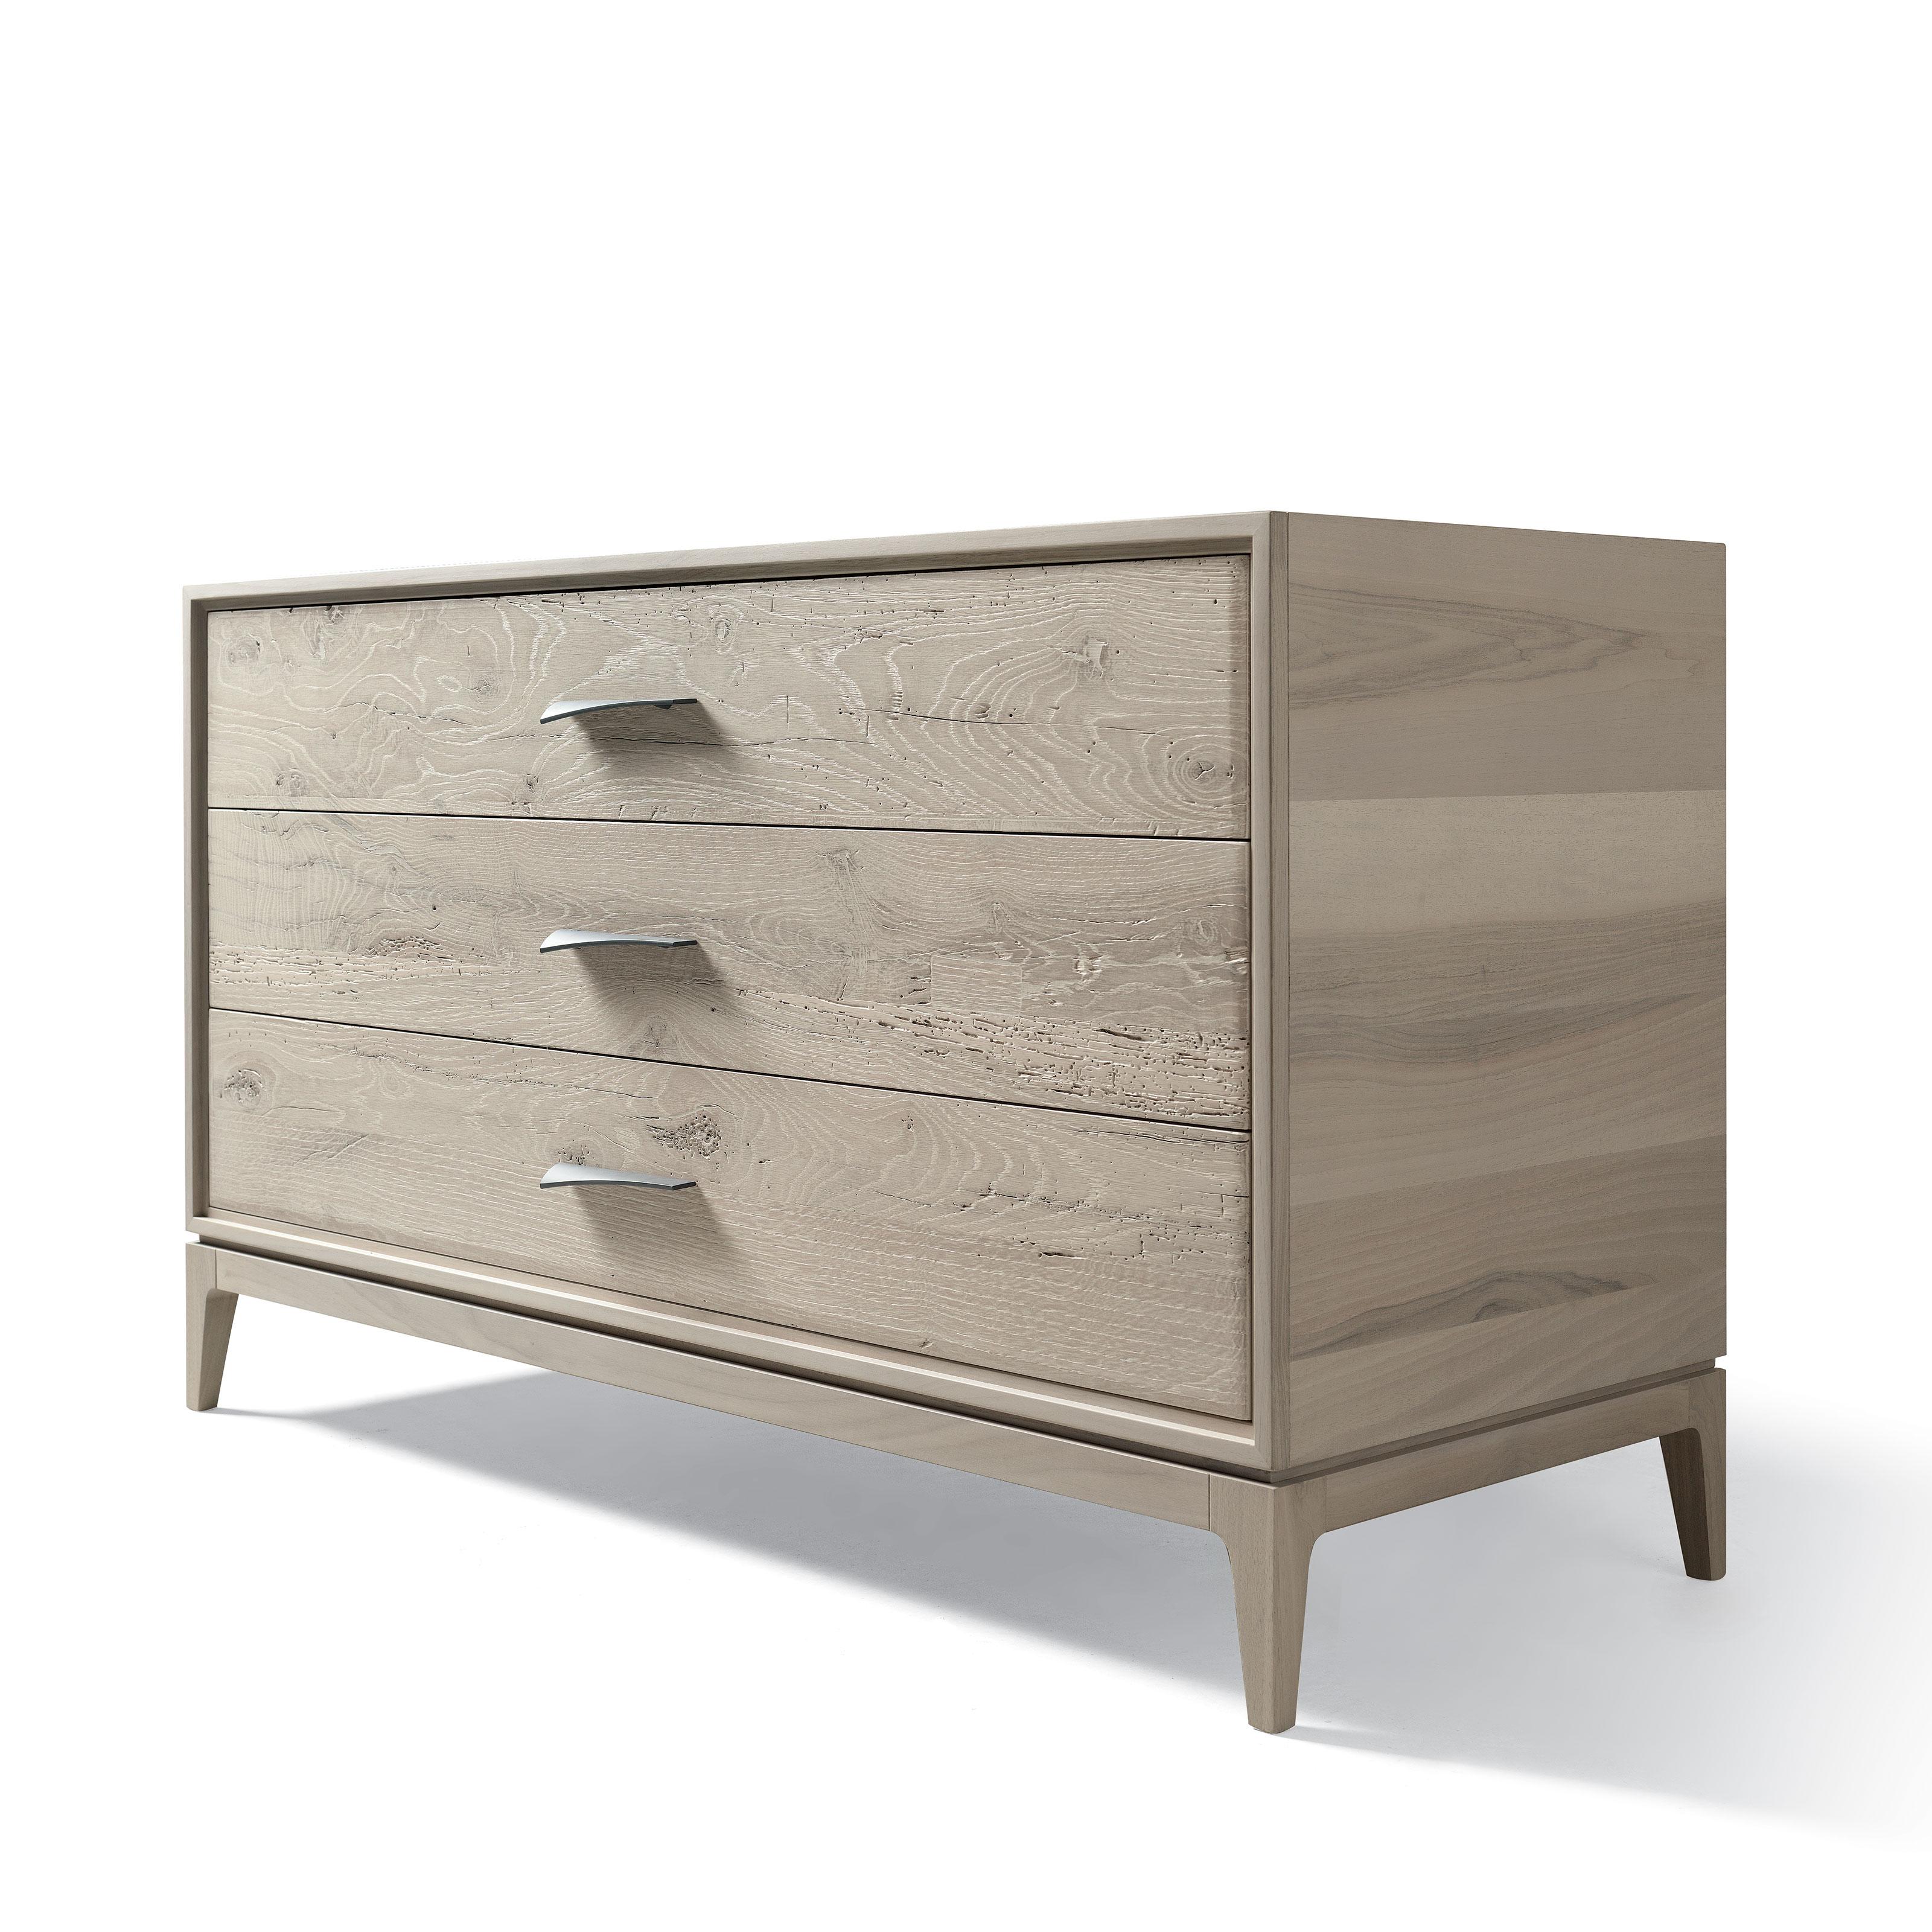 Velo solid wood dresser is the result of passion, skills, and refined craftsmanship. It features a structure in solid walnut blockboard and drawers in antique oak with a slightly inclined handle to add personality to the furniture. Thanks to the